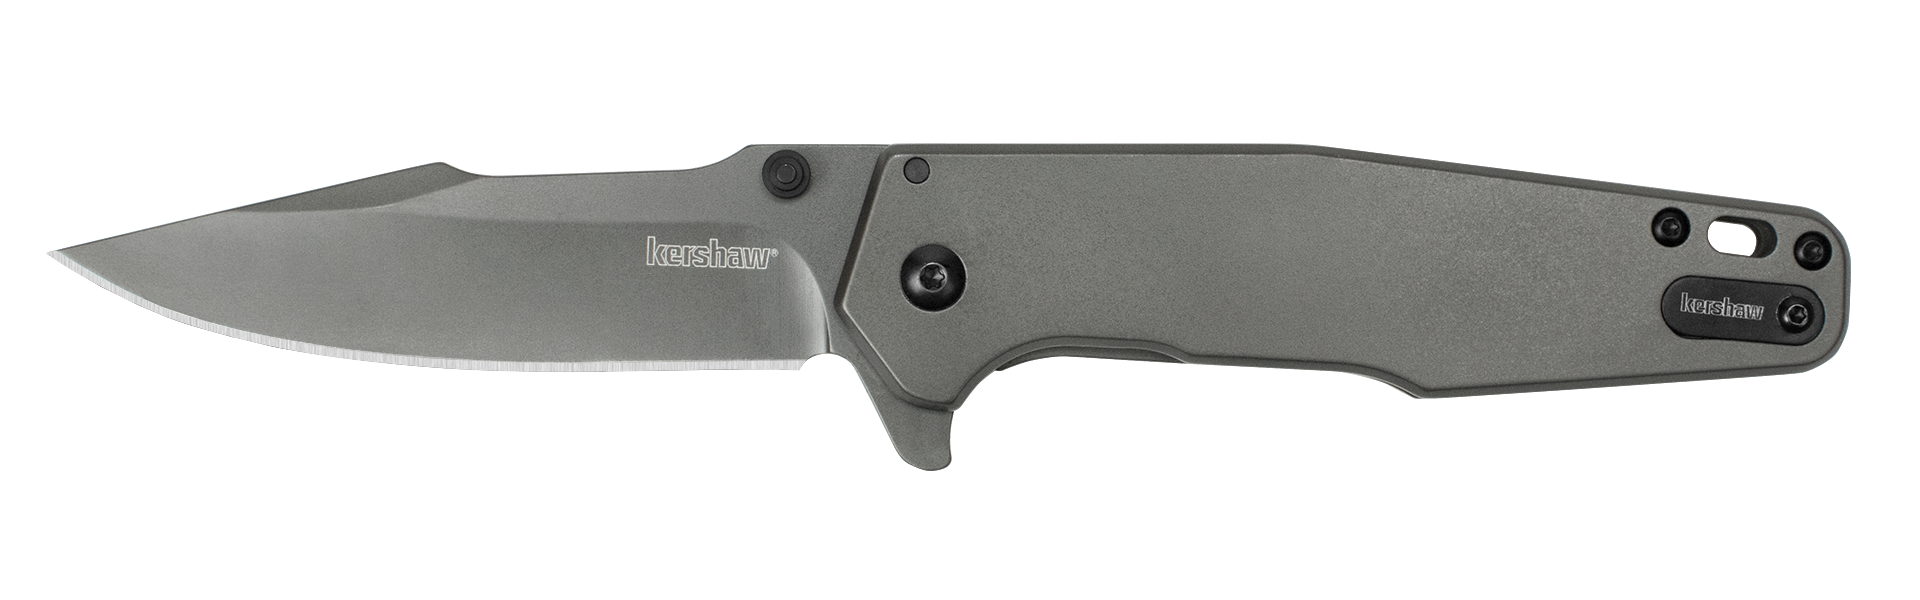 Kershaw - Ferrite - Assisted Opening - 1557TI